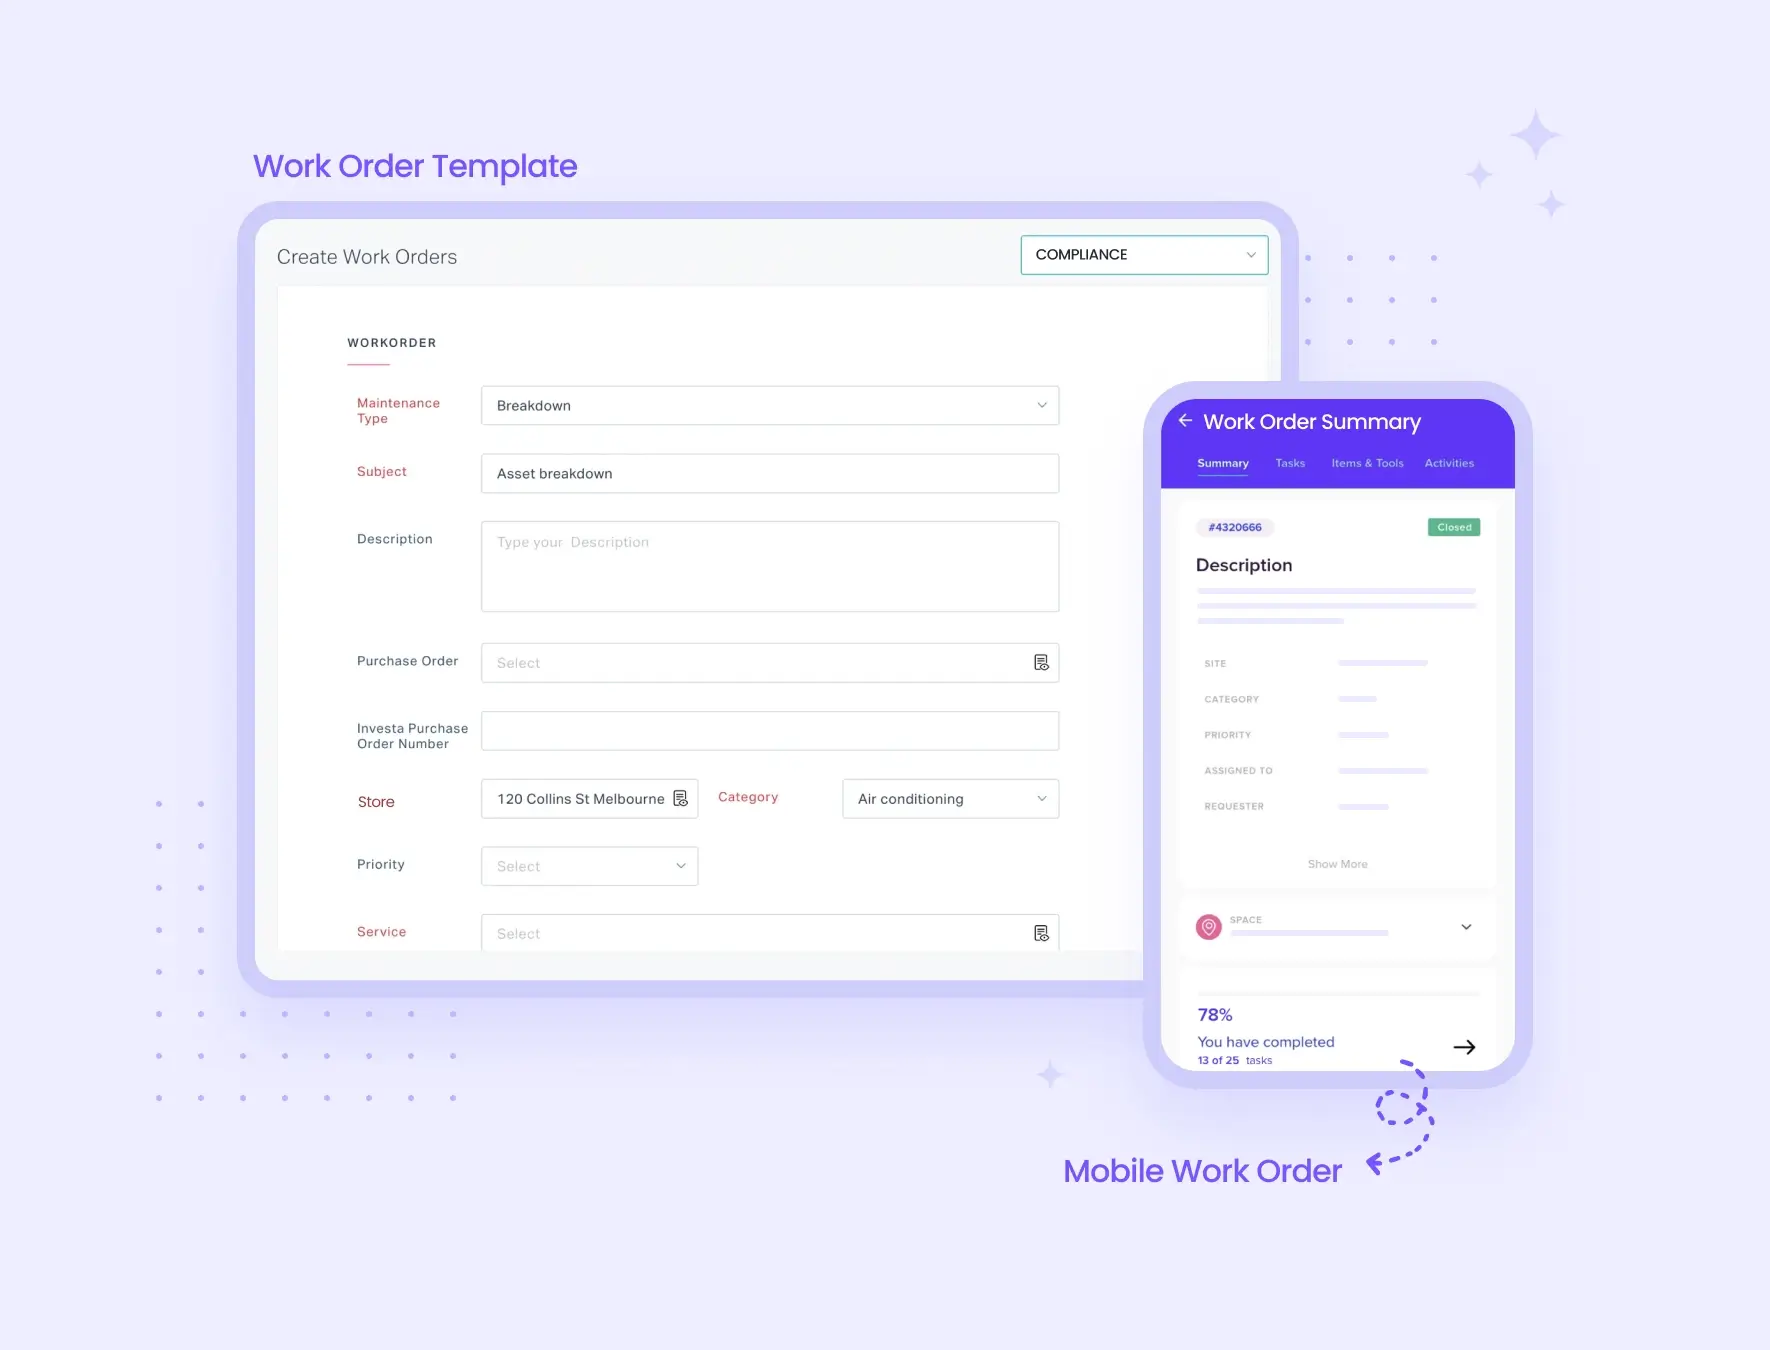 Create mobile-friendly work orders easily with existing templates, inventory details, automated response workflows, and more